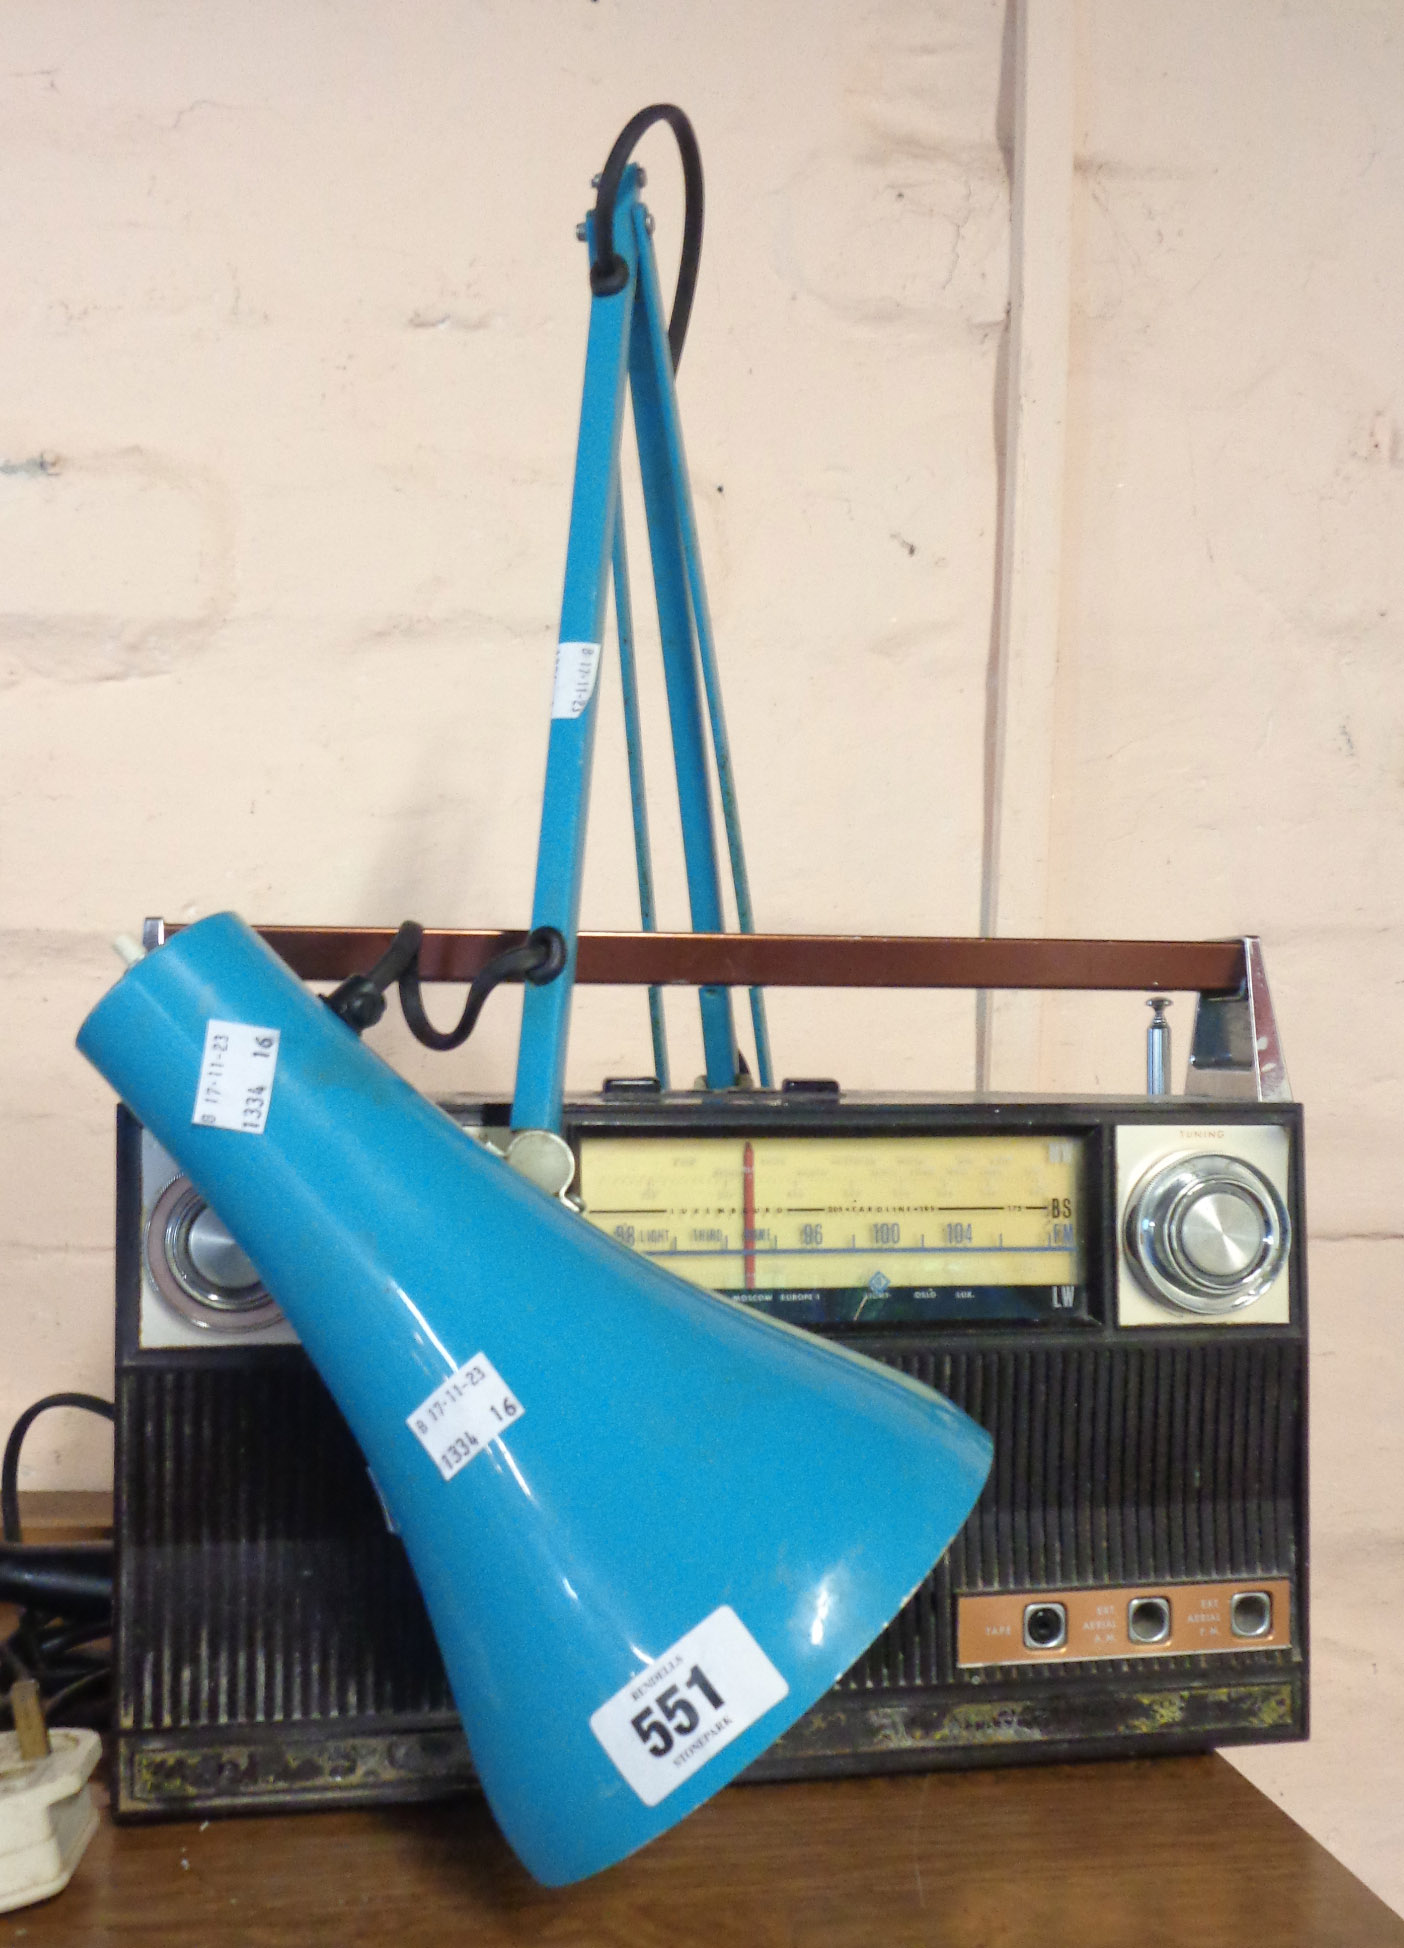 A vintage anglepoise lamp with turquoise painted finish - sold with a vintage portable transistor